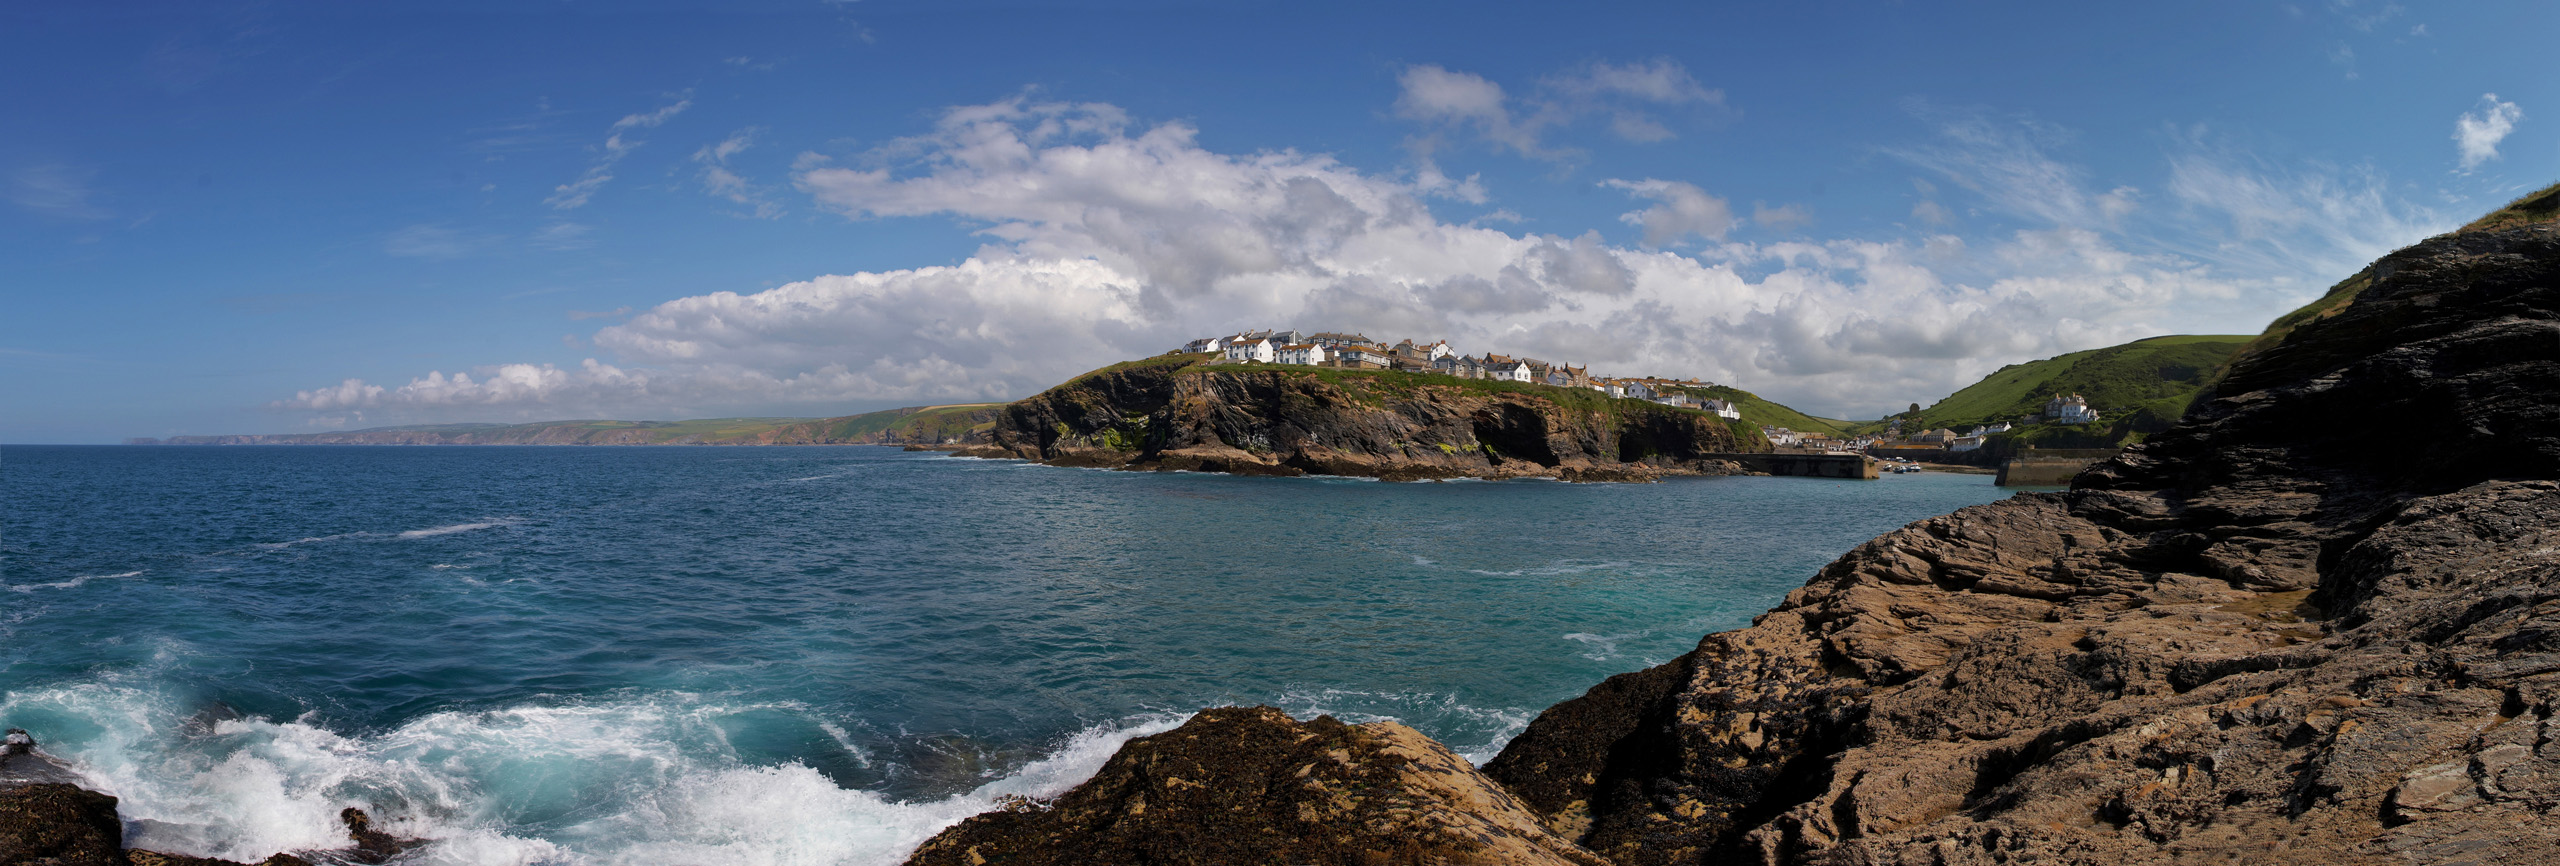 Port Isaac From The Rocks Panorama